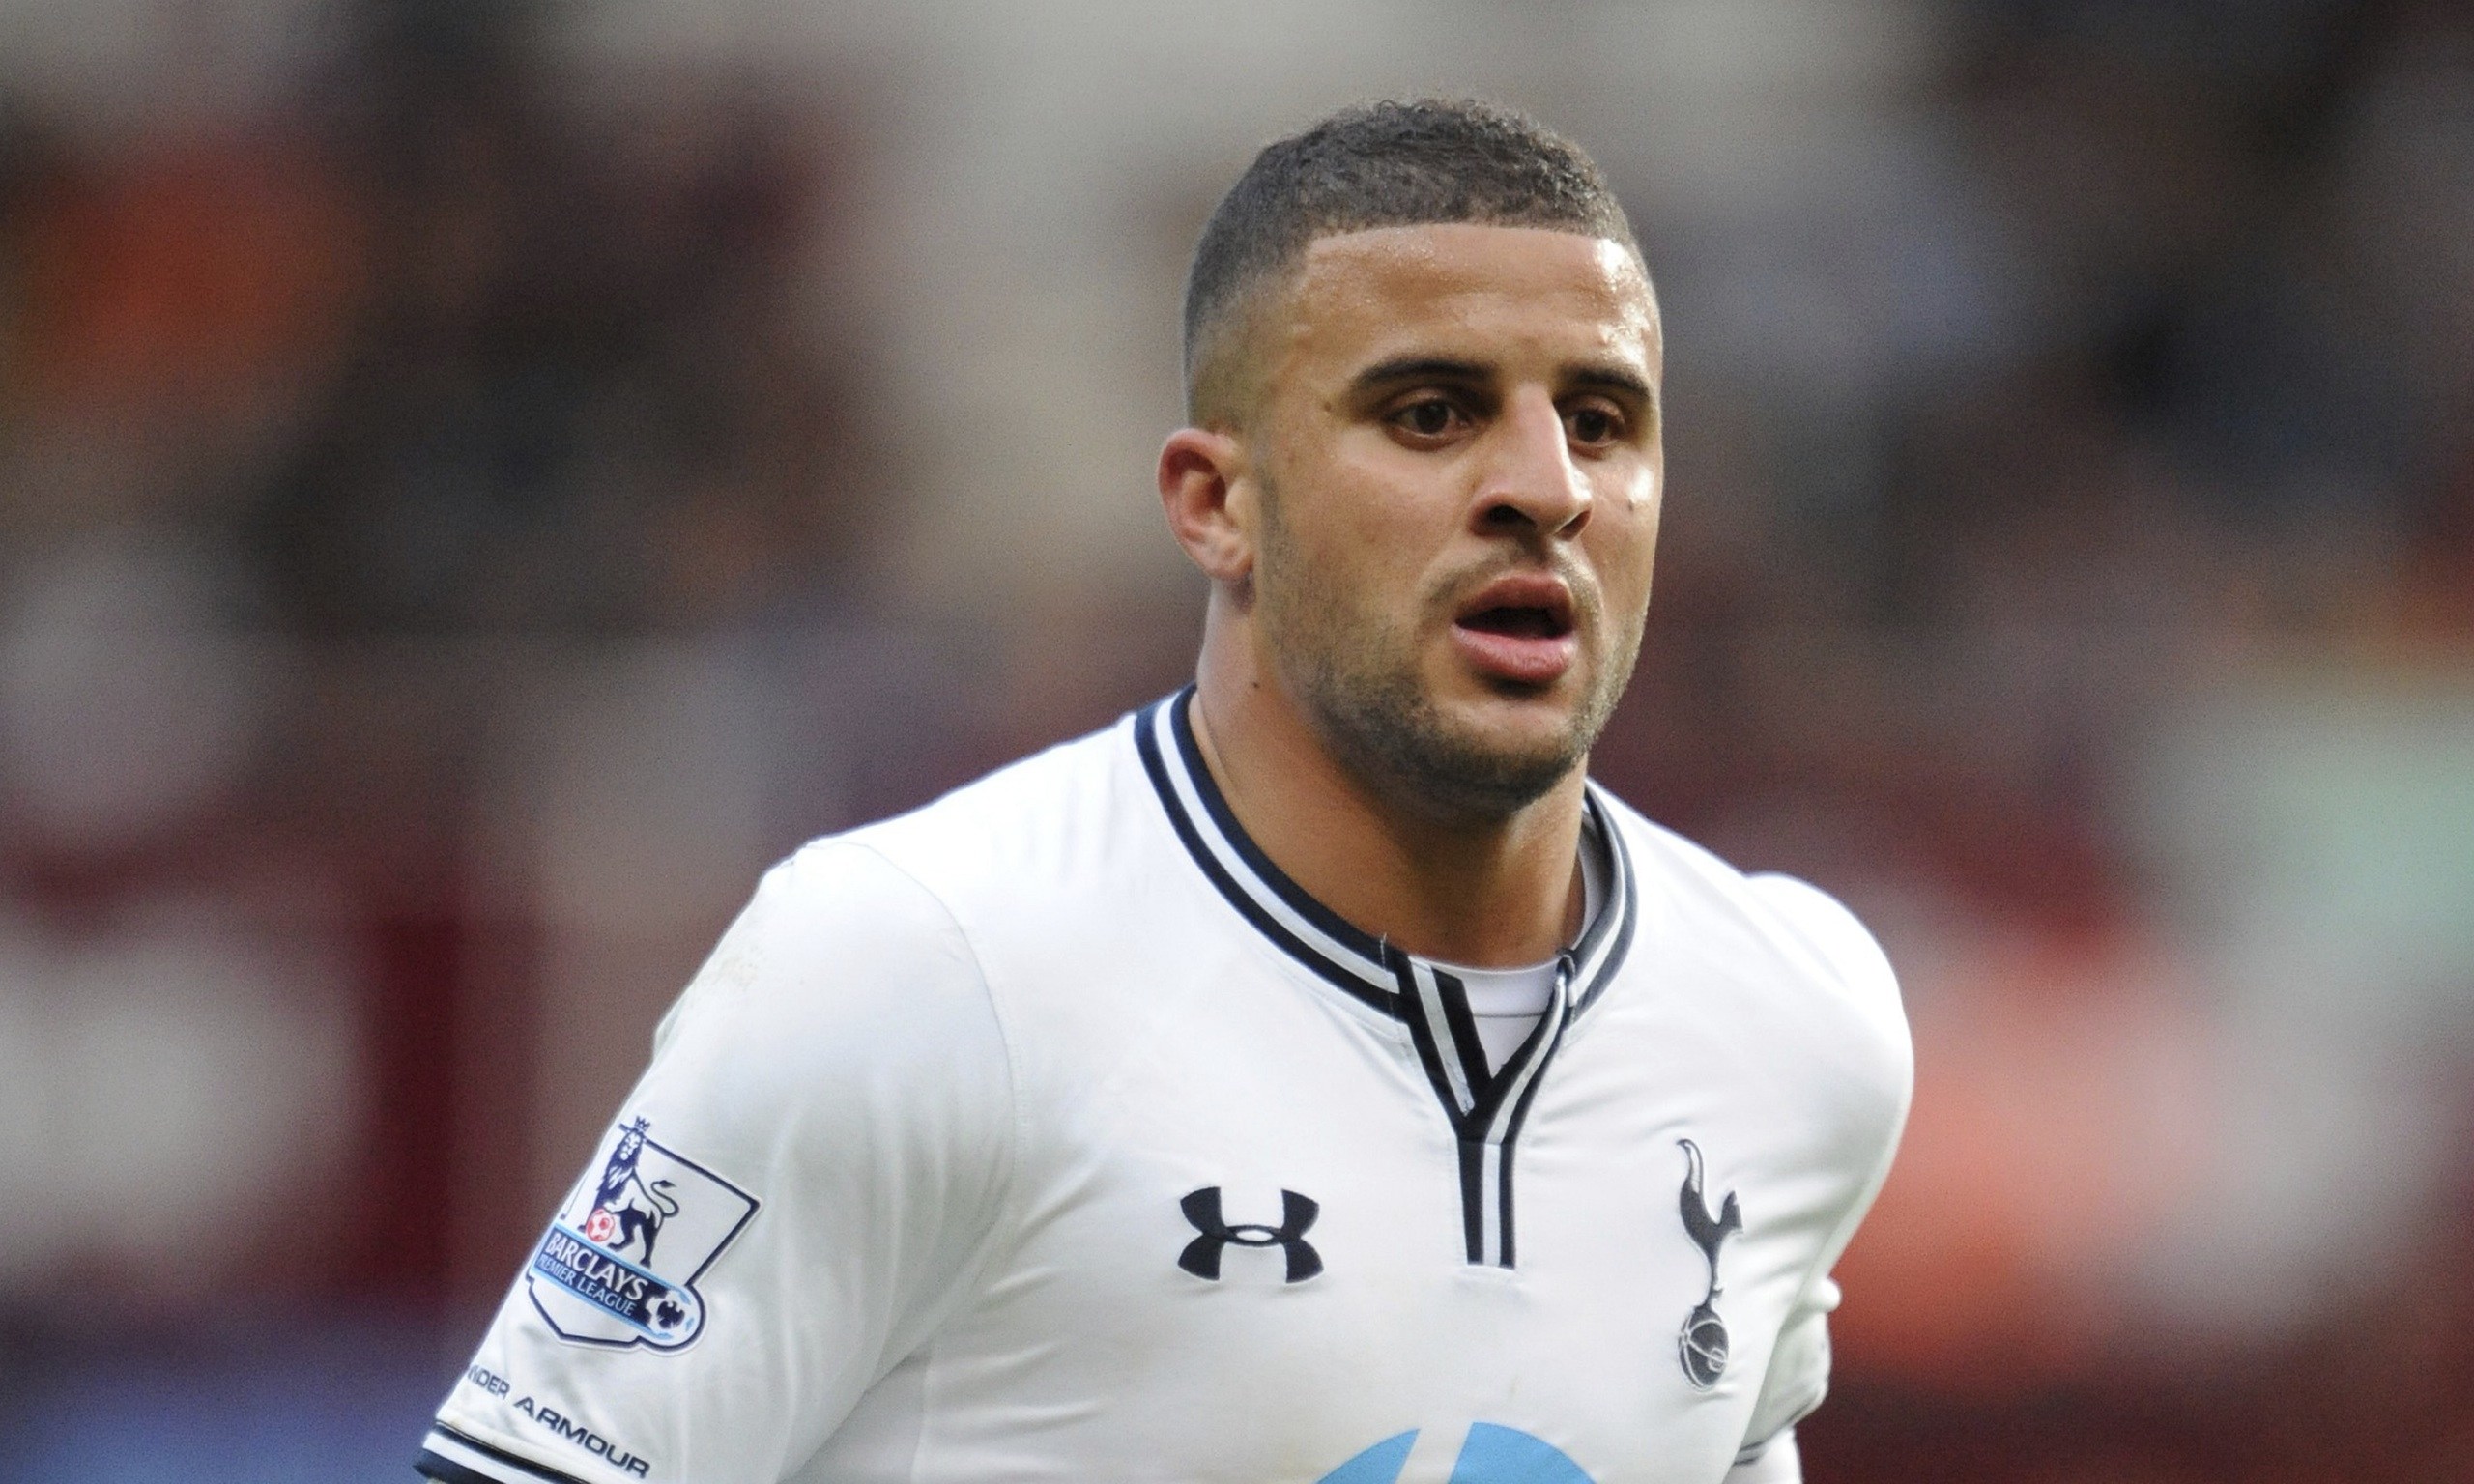 KYLE WALKER extends contract with Tottenham Hotspur to 2019.